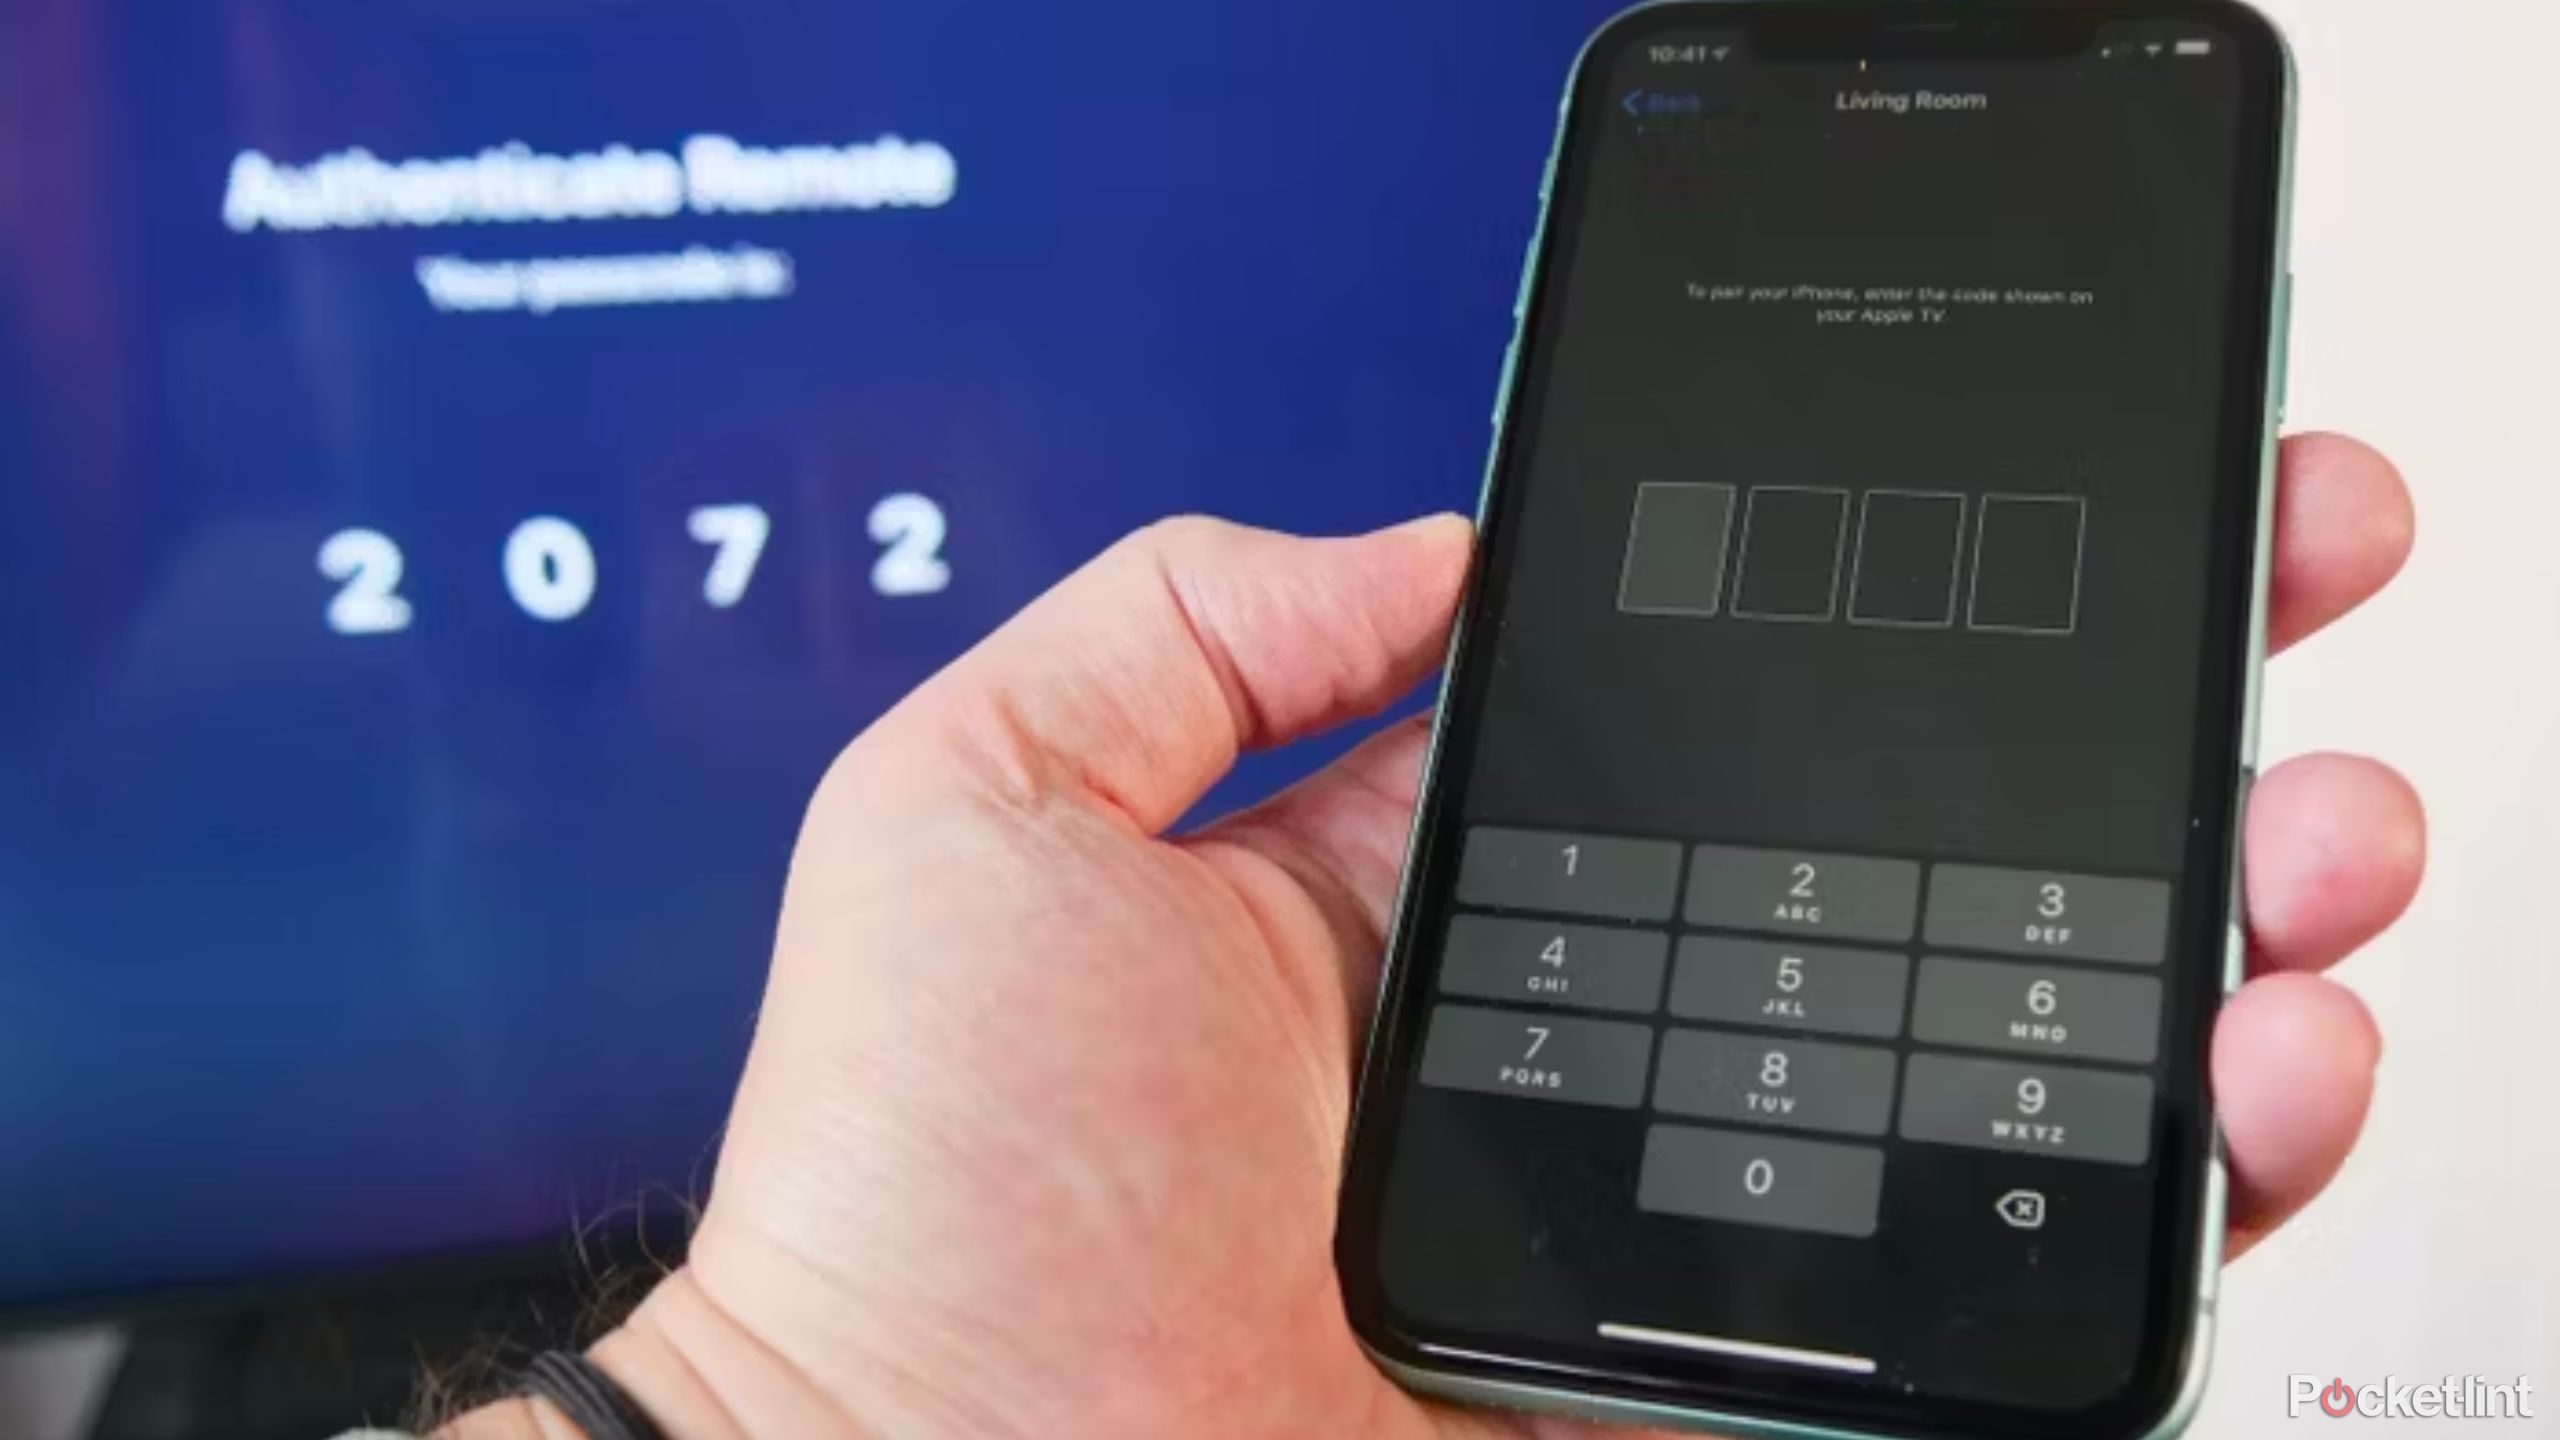 Using iPhone as TV remote